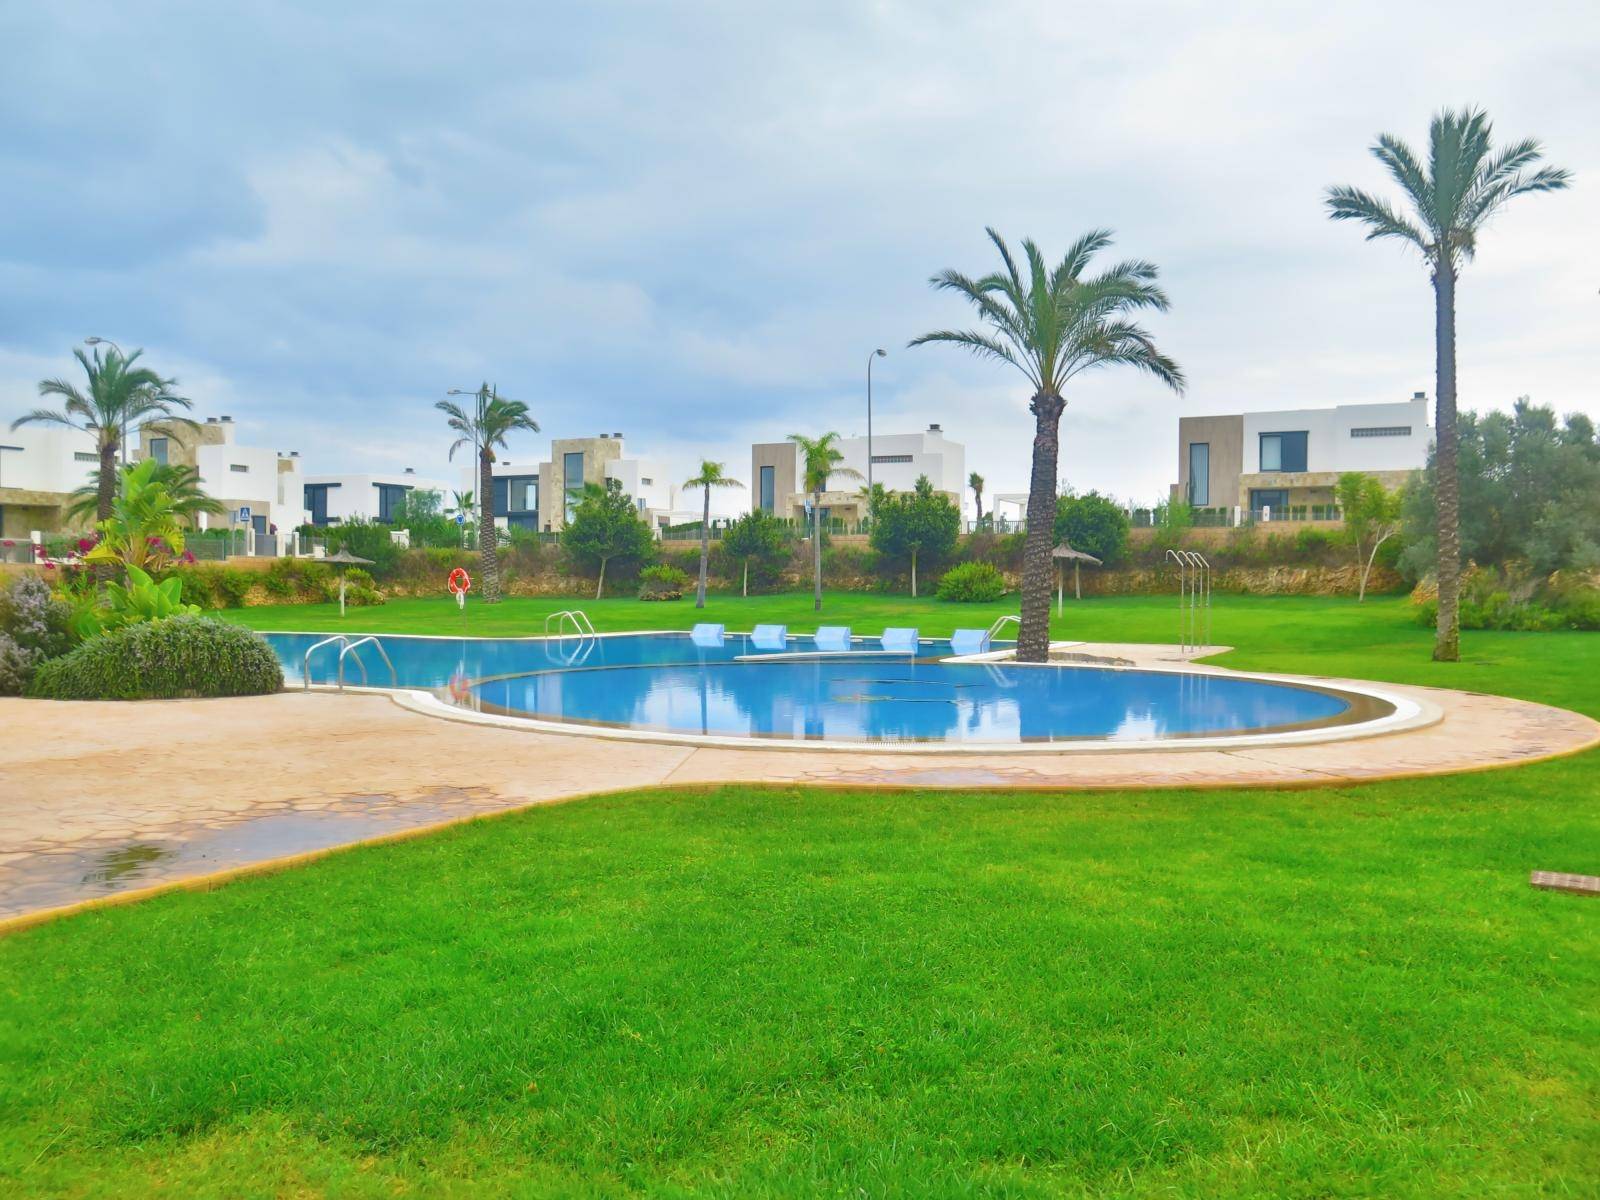 Bungalow for rent Cala murada with communal pool and jacuzzi